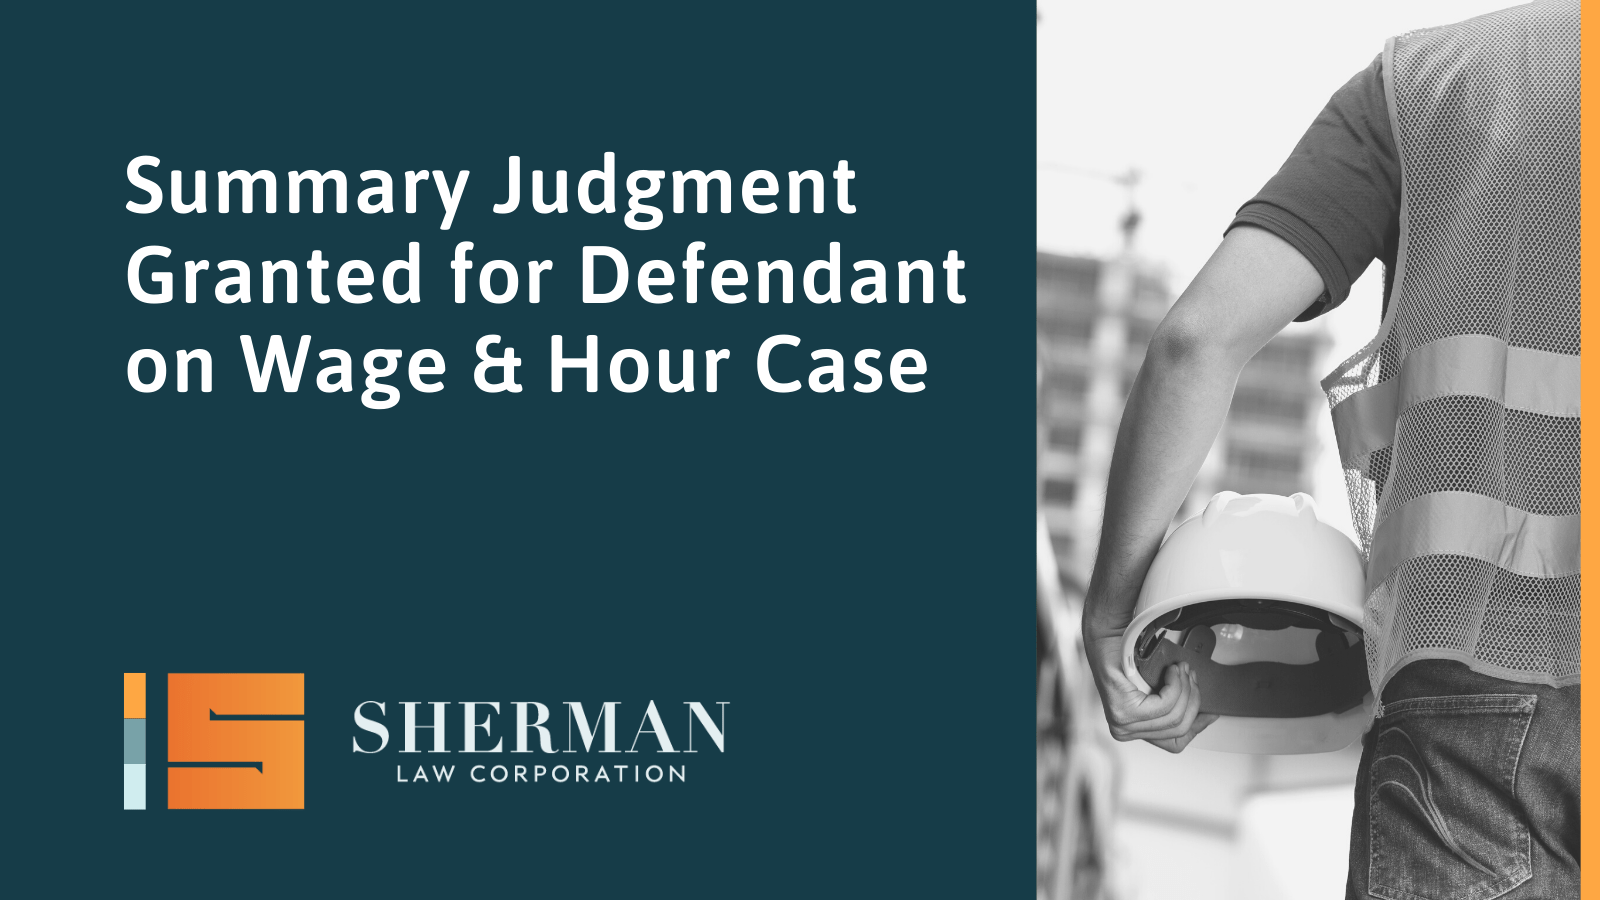 Summary Judgment Granted for Defendant on Wage & Hour Case - sherman law corporation